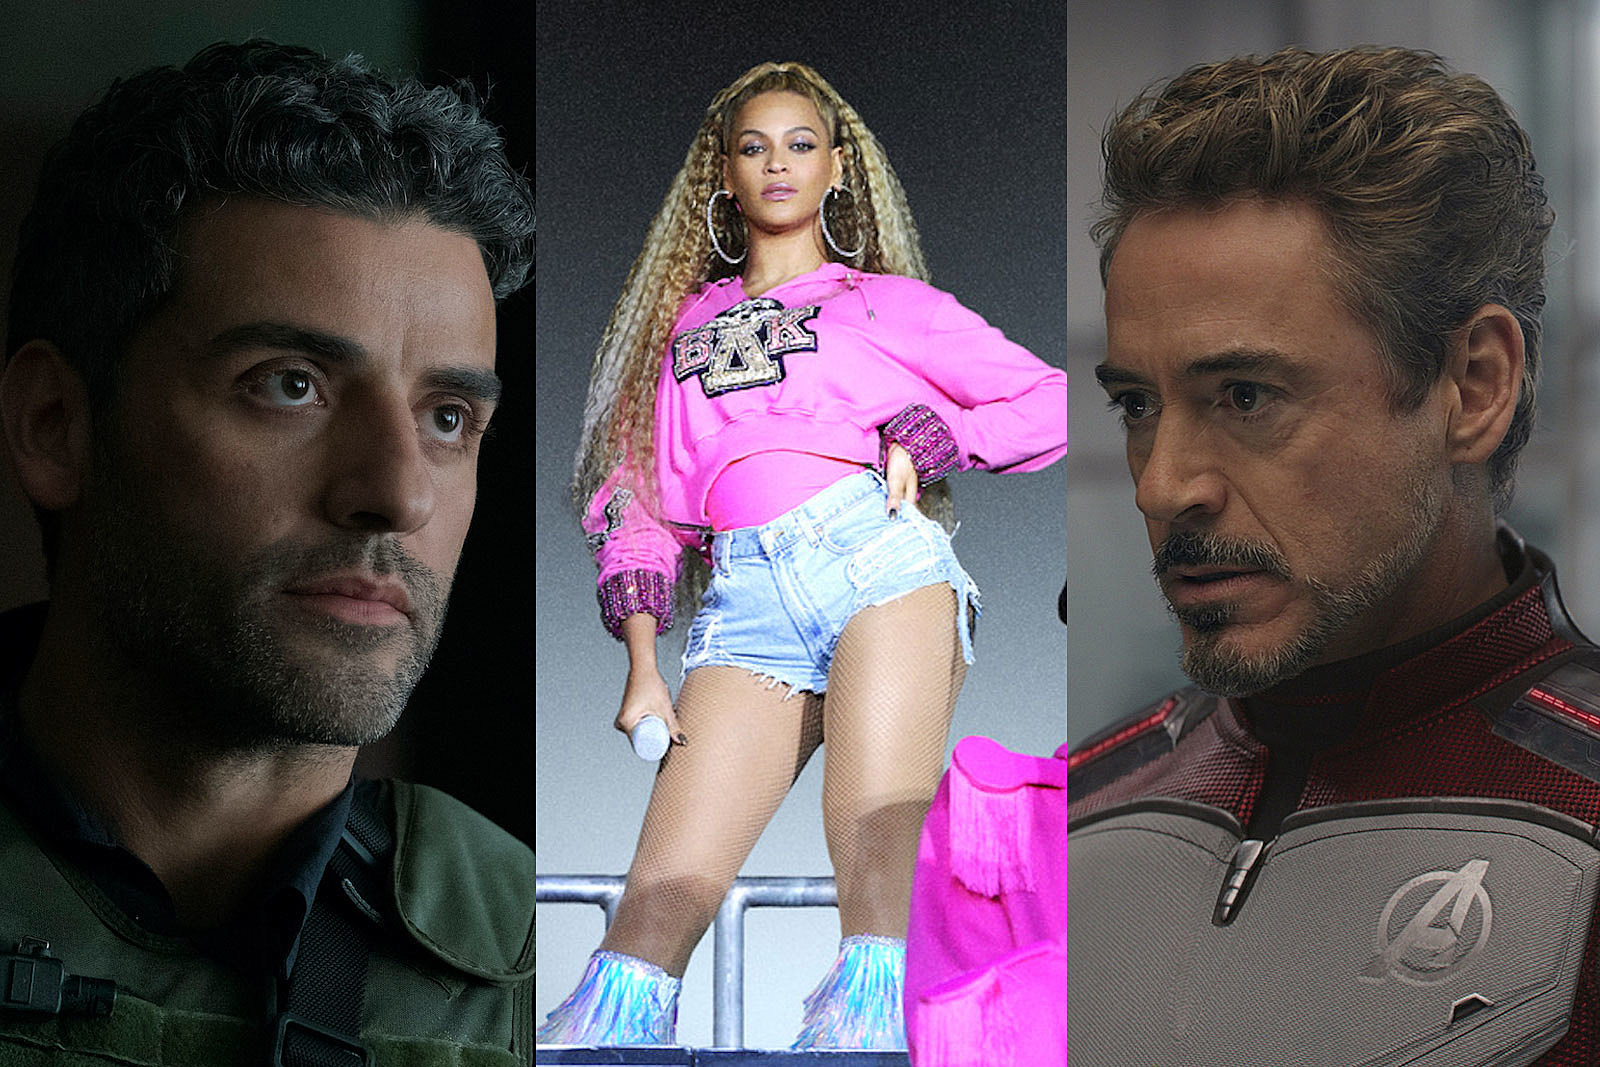 The Best Movies So Far The Best Movies Of 2019 Best New Films Of The Year Rotten Tomatoes